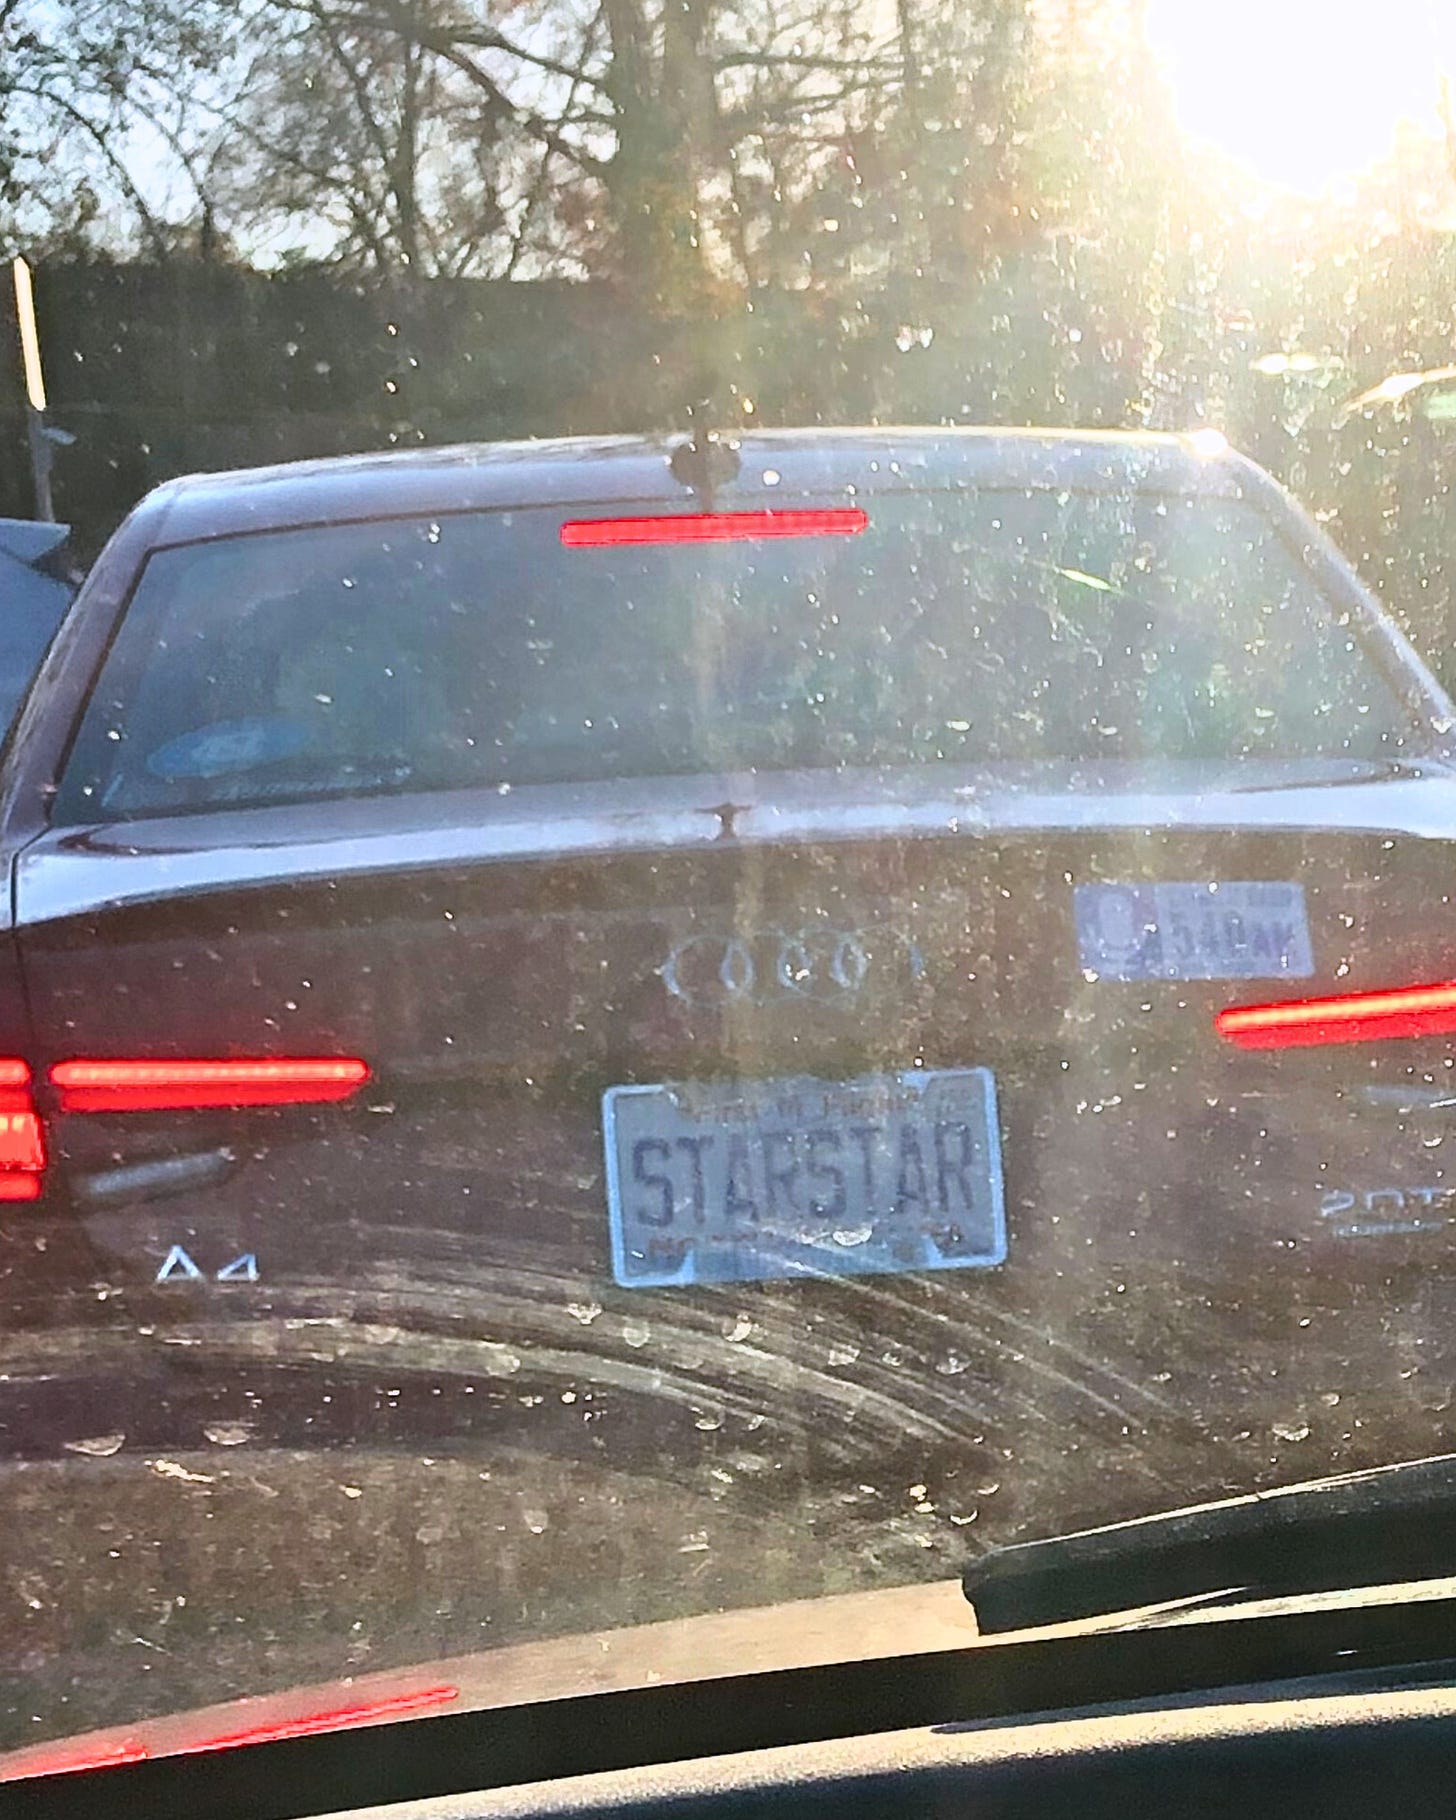 image taken from behind the wheel looking out of a dirty windshield at sunset toward the car in front which has a license place that can just barely be seen that says “STARSTAR”